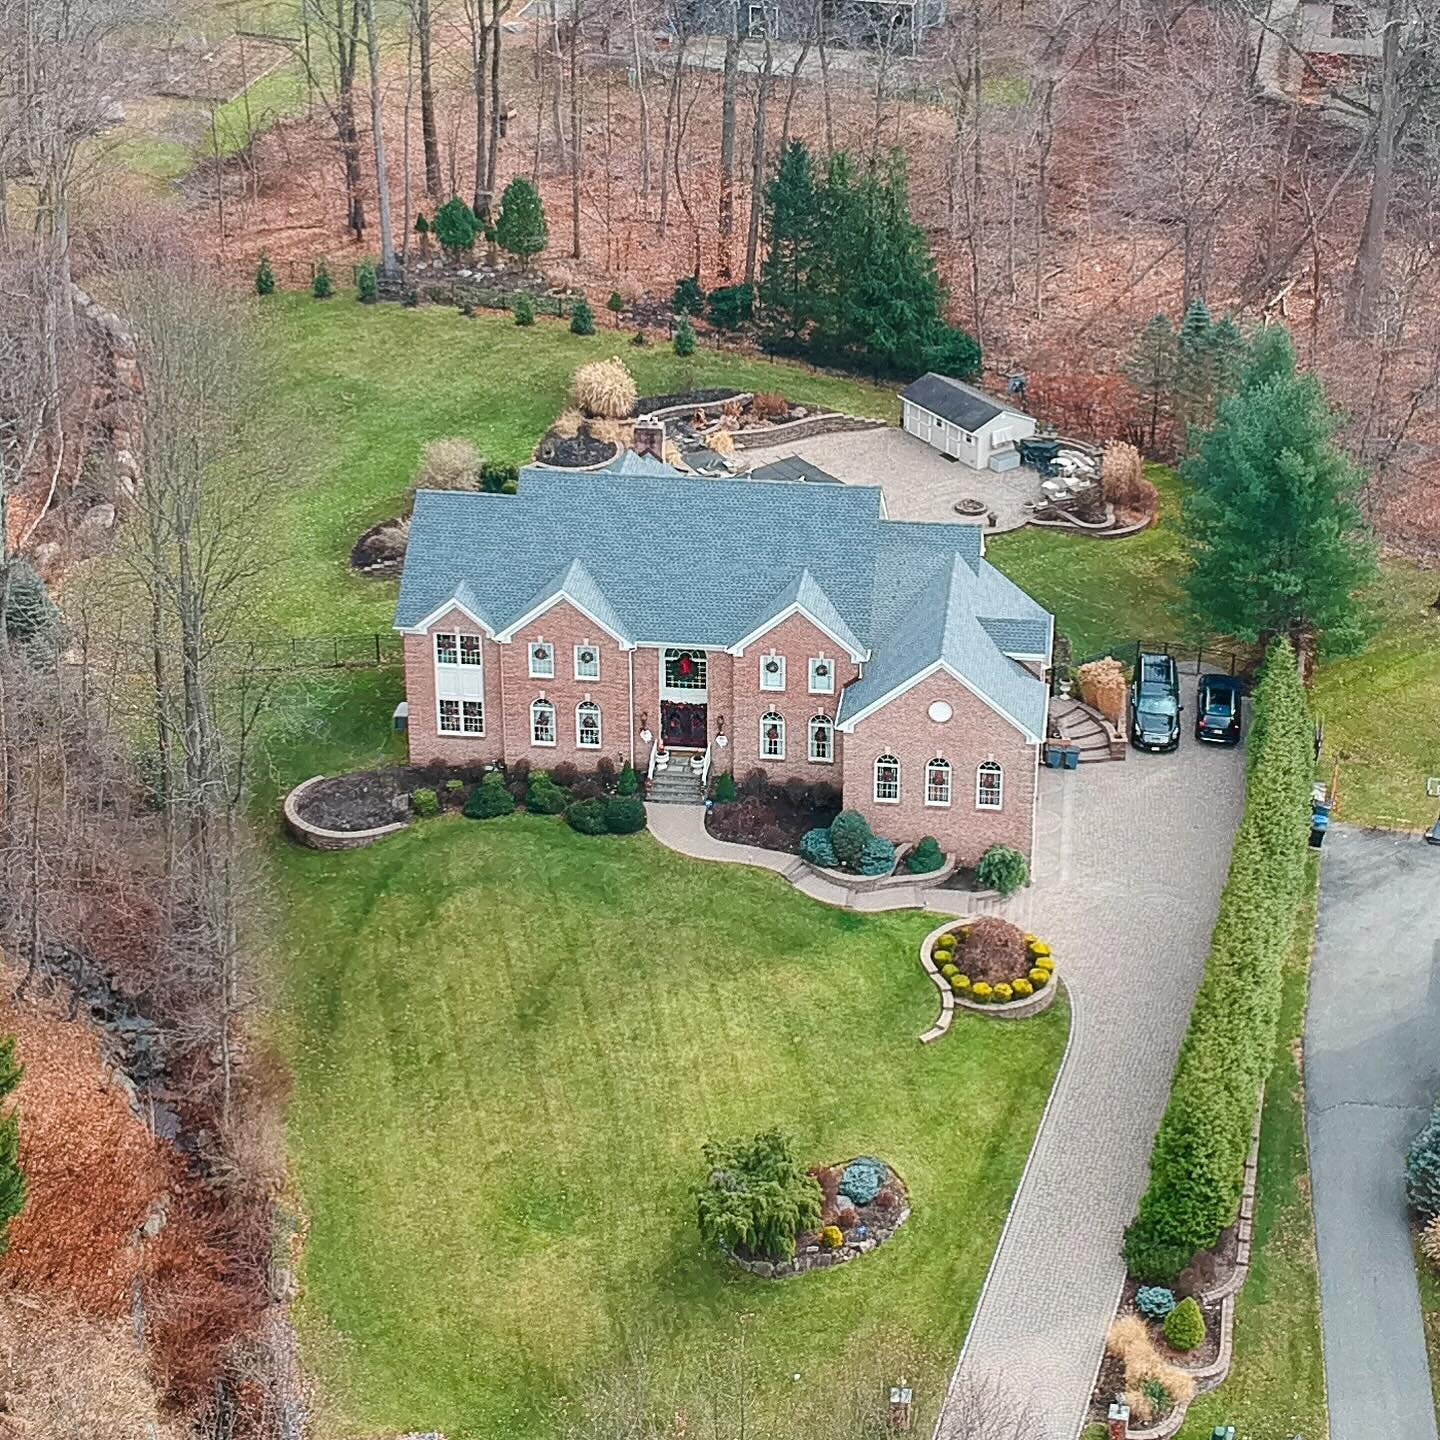 Check out this residential roof project in Deville!
.
.
.
#roofingcontractors #roofingcommunity #roofingservices #roofingspecialists #residentialroofing #homerestoration #njcontractor #roofing #roofpro #guttercleaning #njremodeling #njrealestate #roo